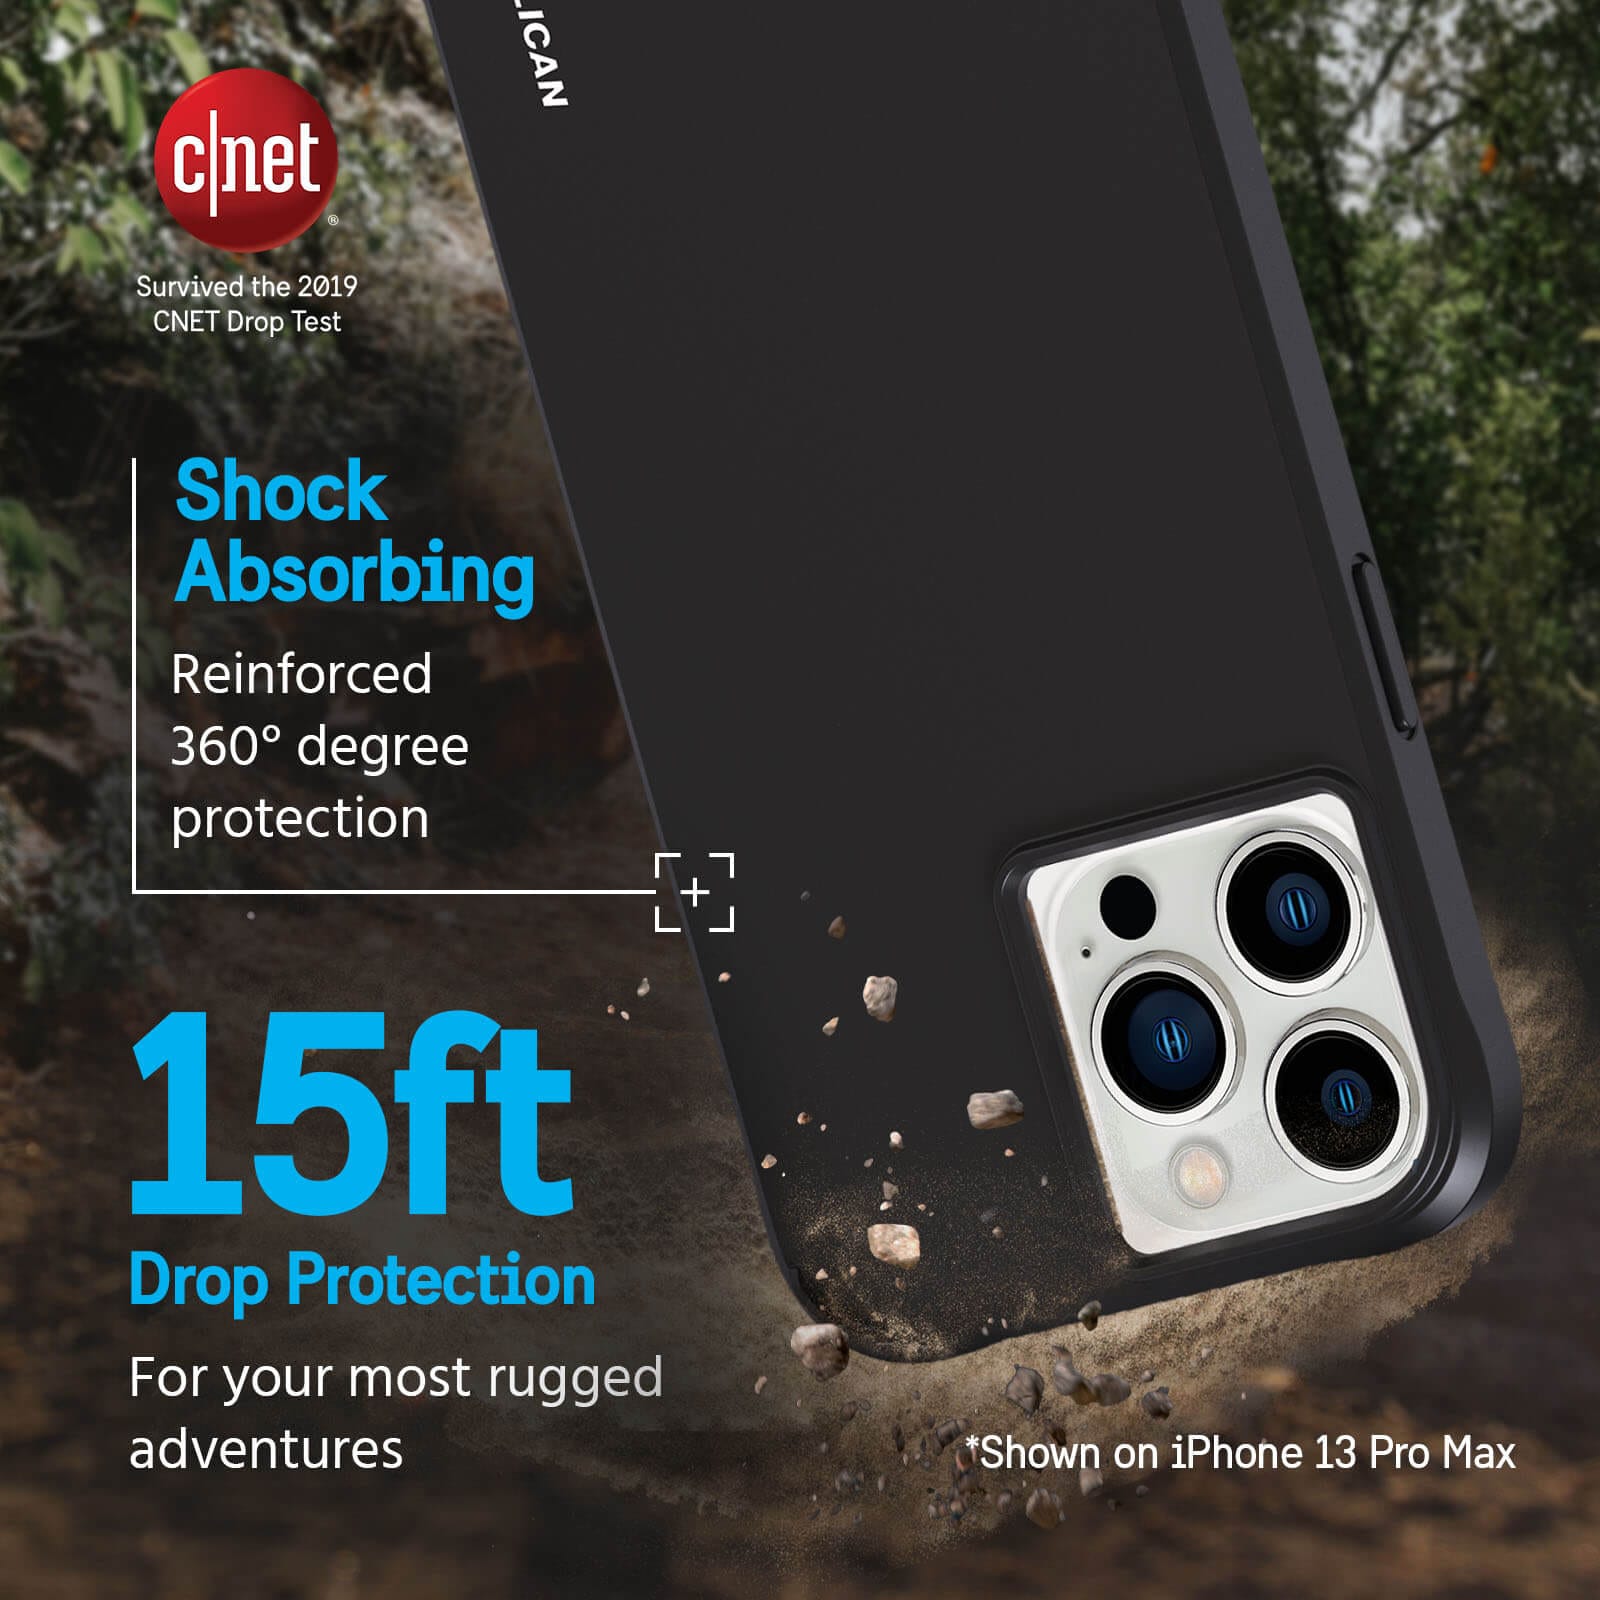 Survived the 2019 CNET Drop Test. Shock absorbing reinforced 360 degree protection. *Shown on iPhone 13 Pro Max. color::Black